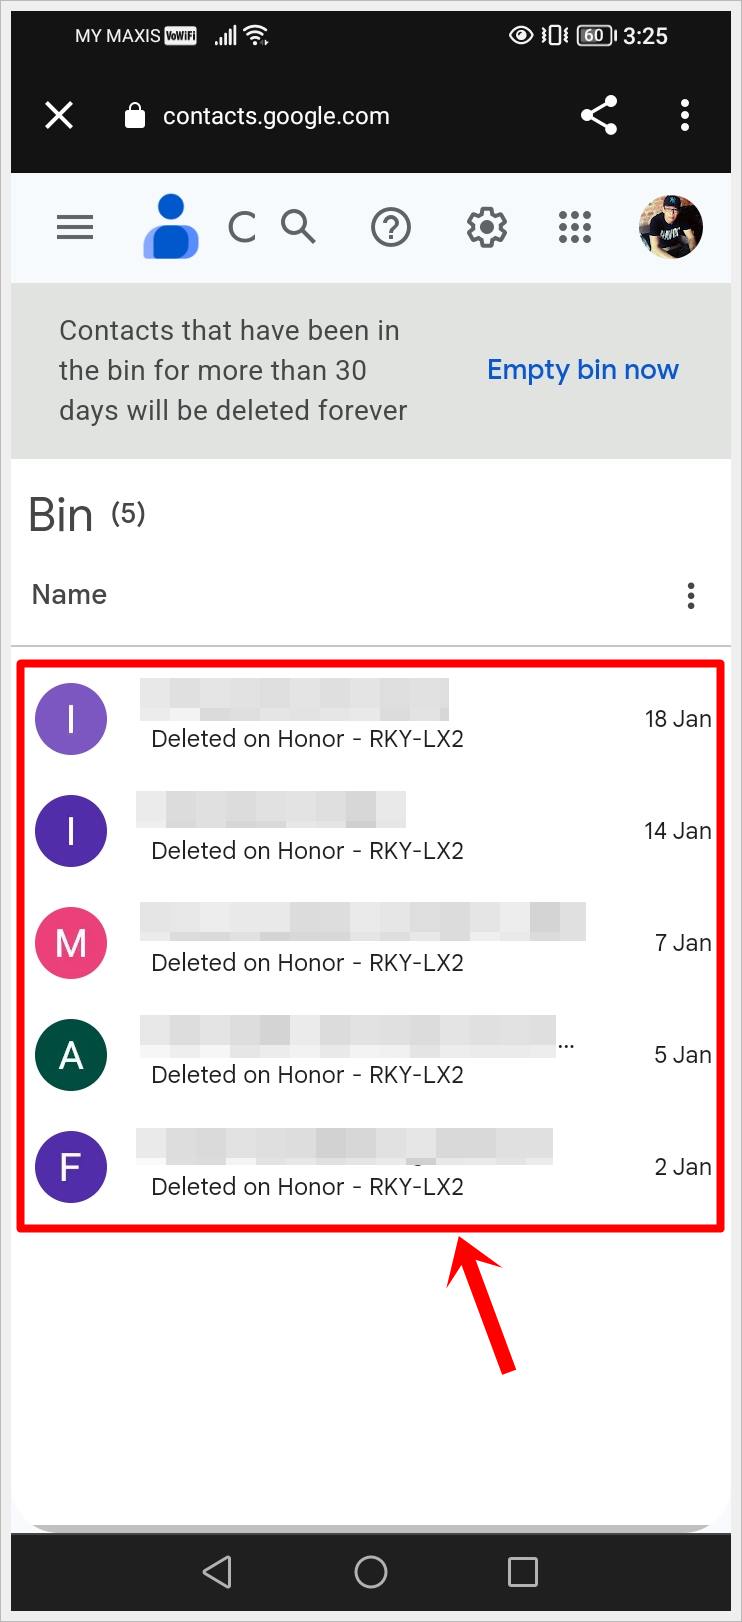 This is a screenshot of the Google Contacts 'Bin' page with a list of recently deleted contacts highlighted.